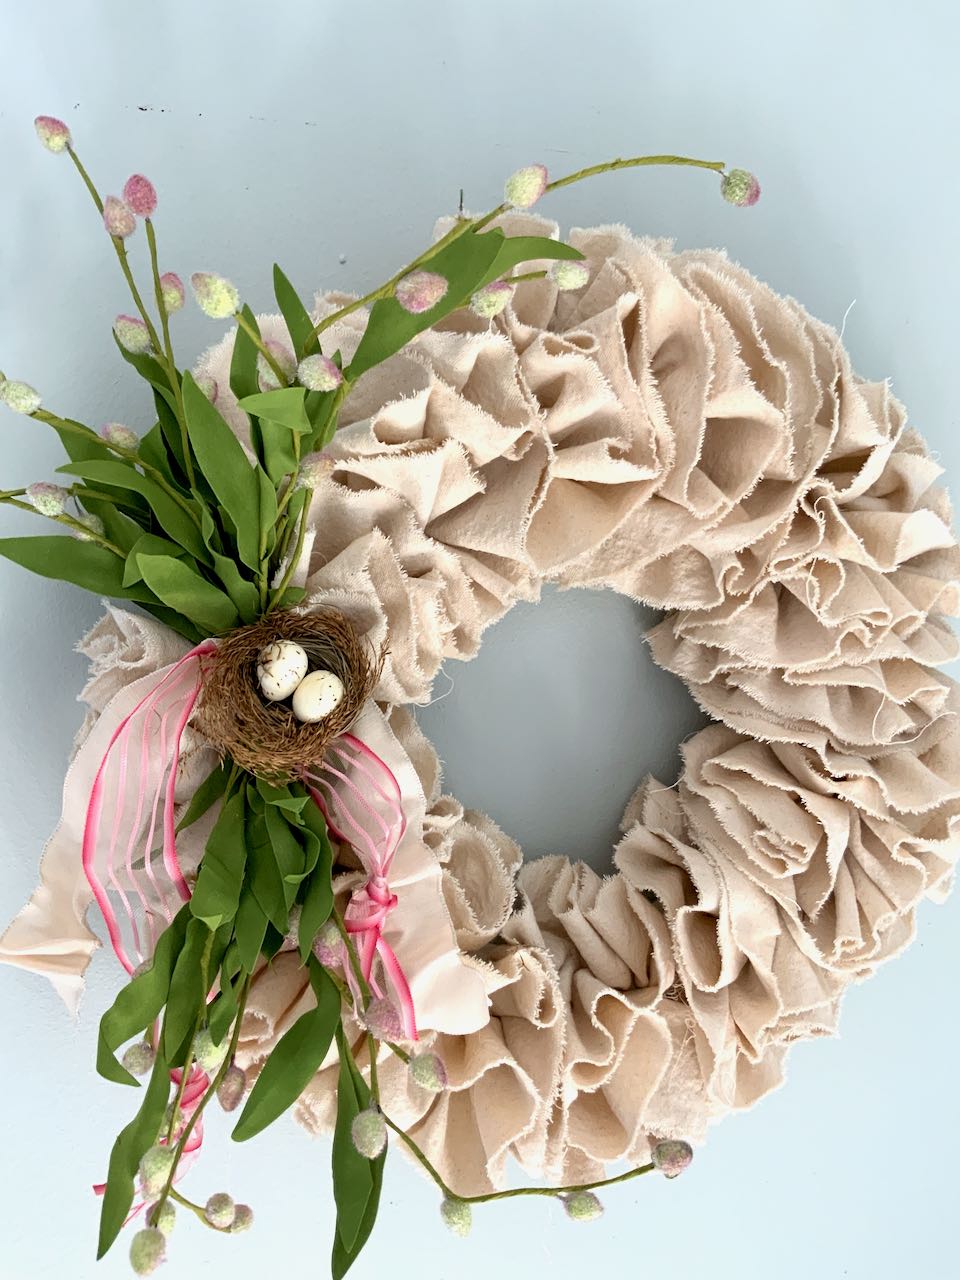 Swirled Canvas Wreath with flowers buds and nest